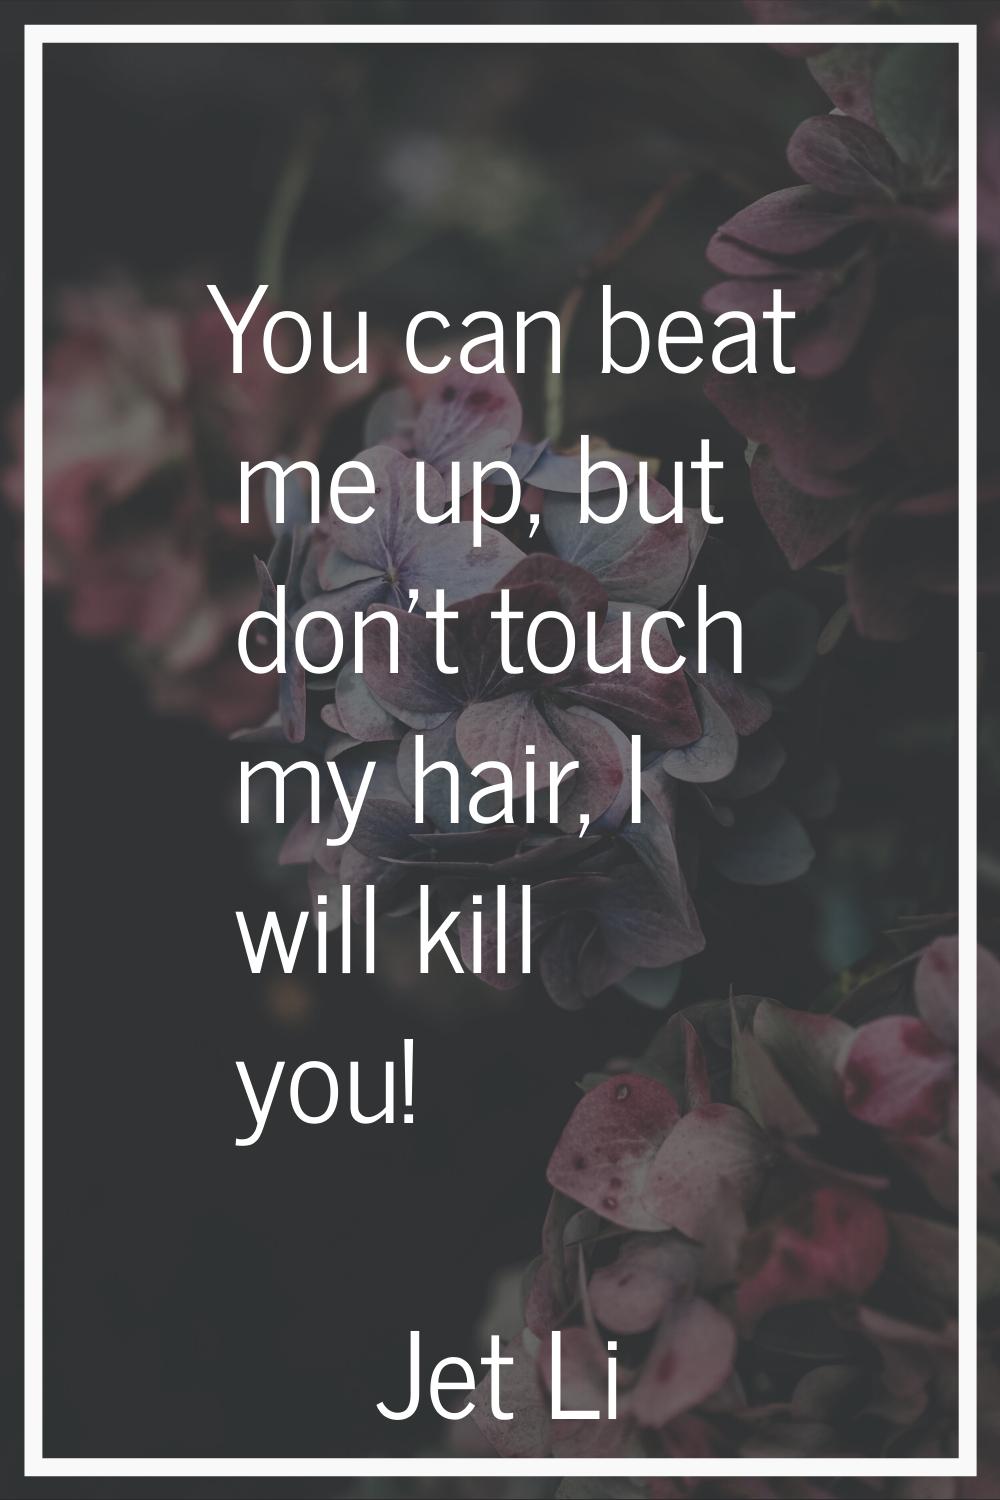 You can beat me up, but don't touch my hair, I will kill you!